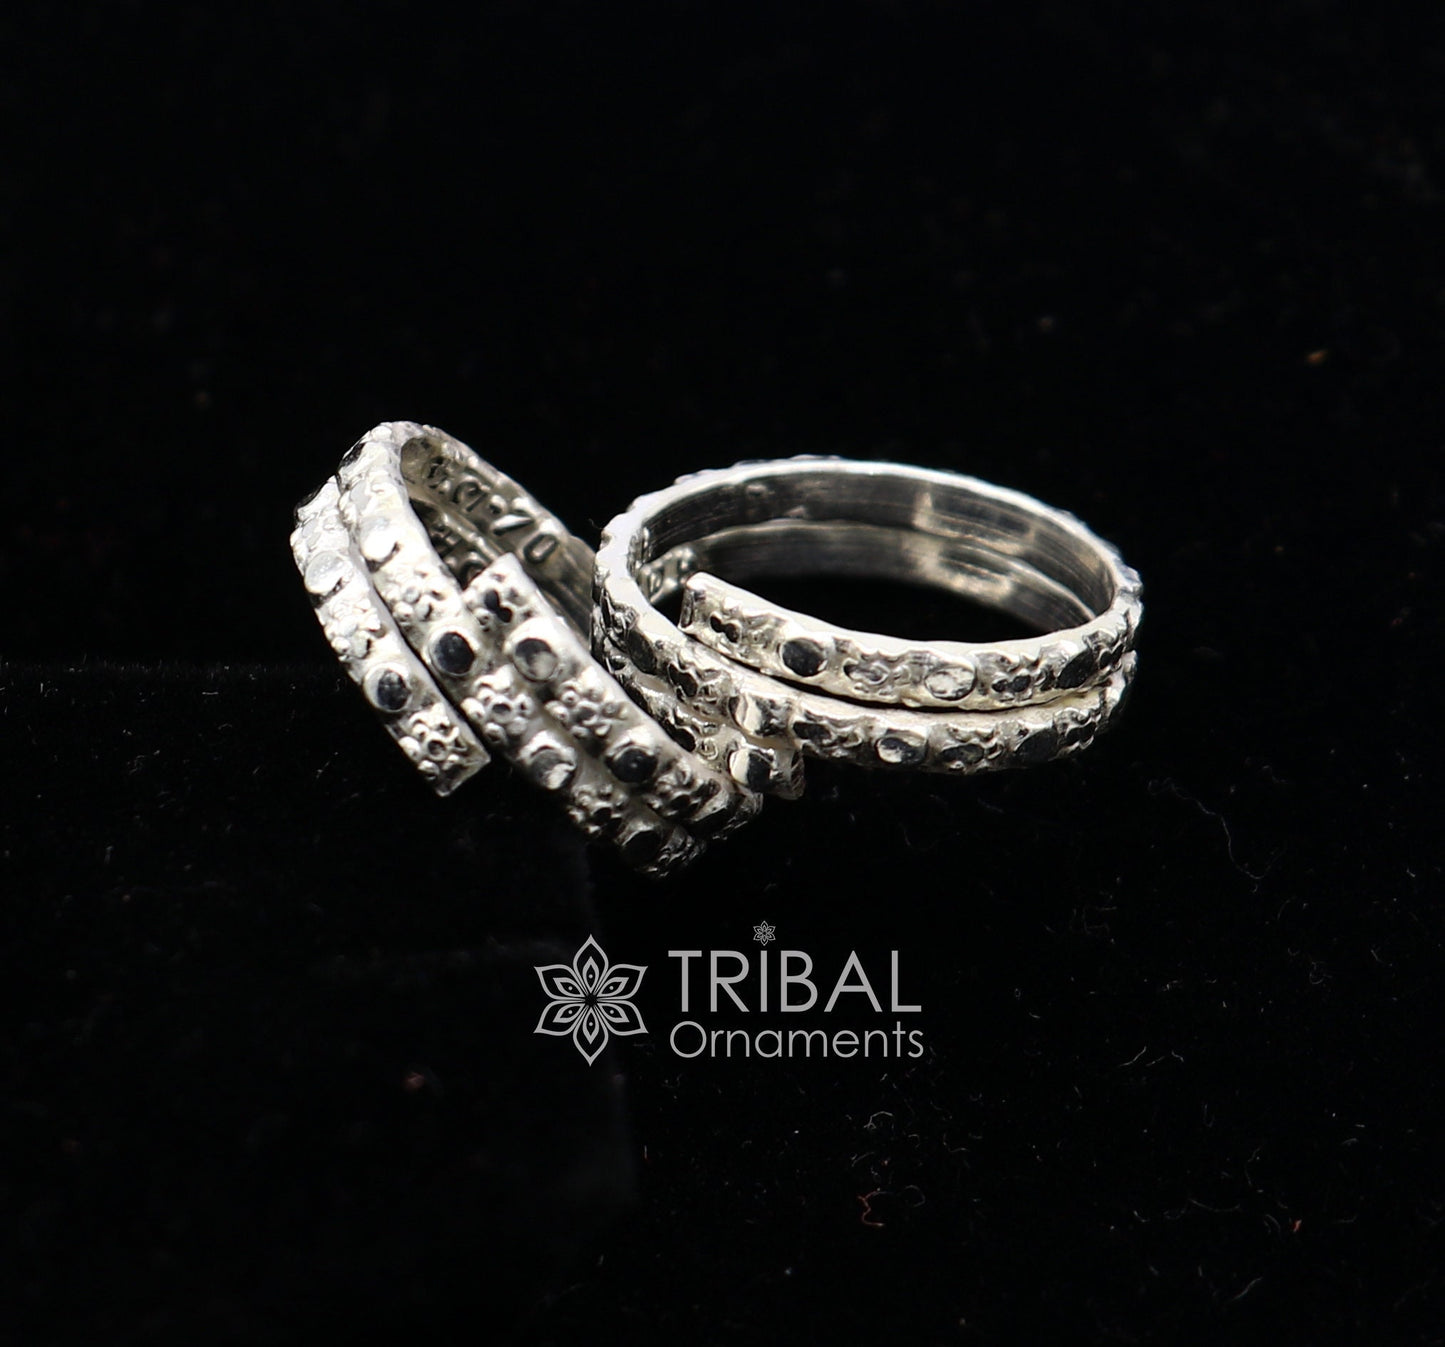 Traditional cultural style solid silver toe ring band handmade spiral design women's jewelry from India amazing tribal jewelry ntr196 - TRIBAL ORNAMENTS